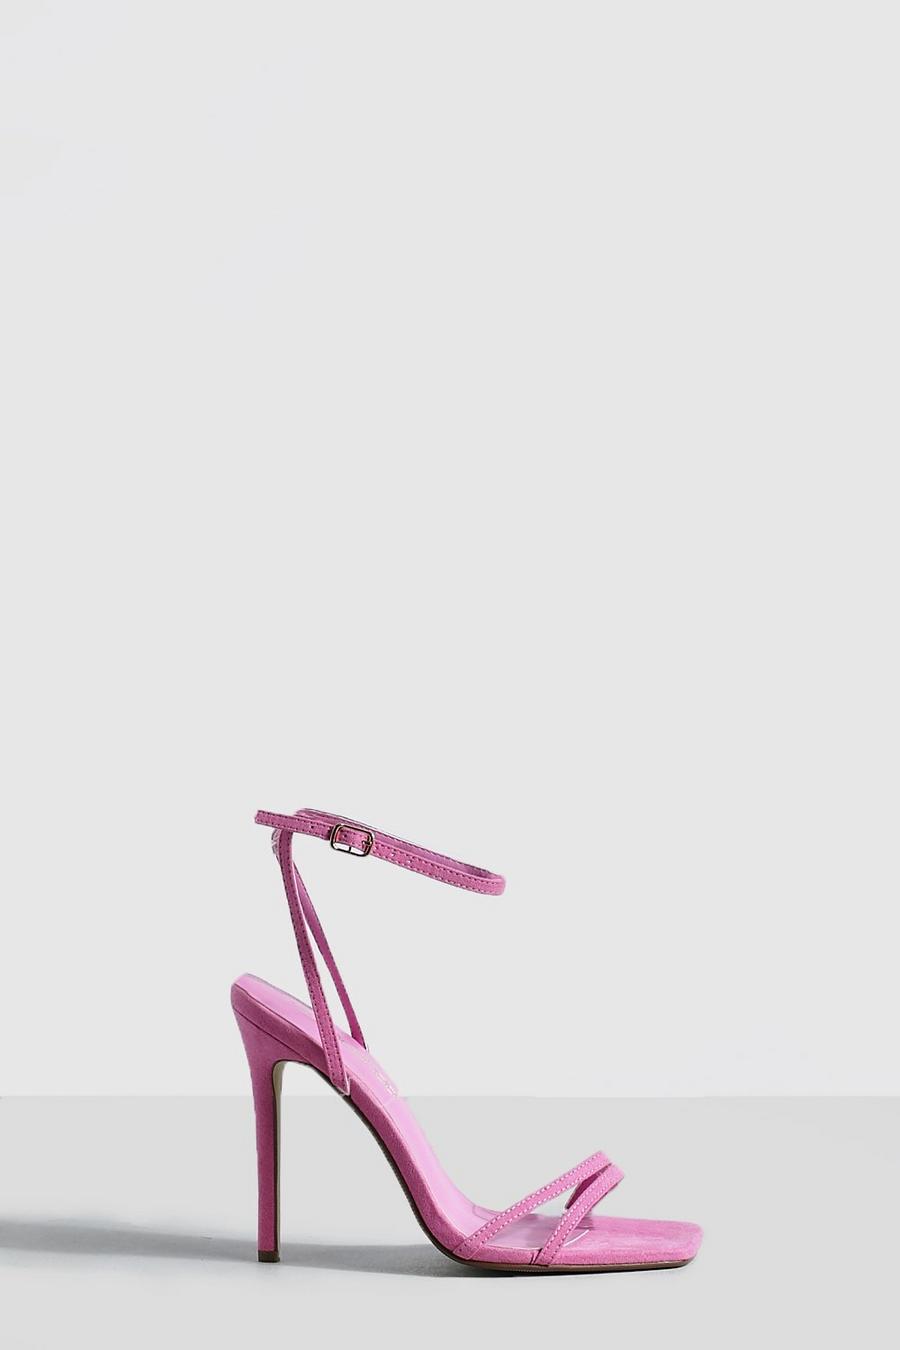 Neon-pink rose Double Strap Barely There Stiletto Heels